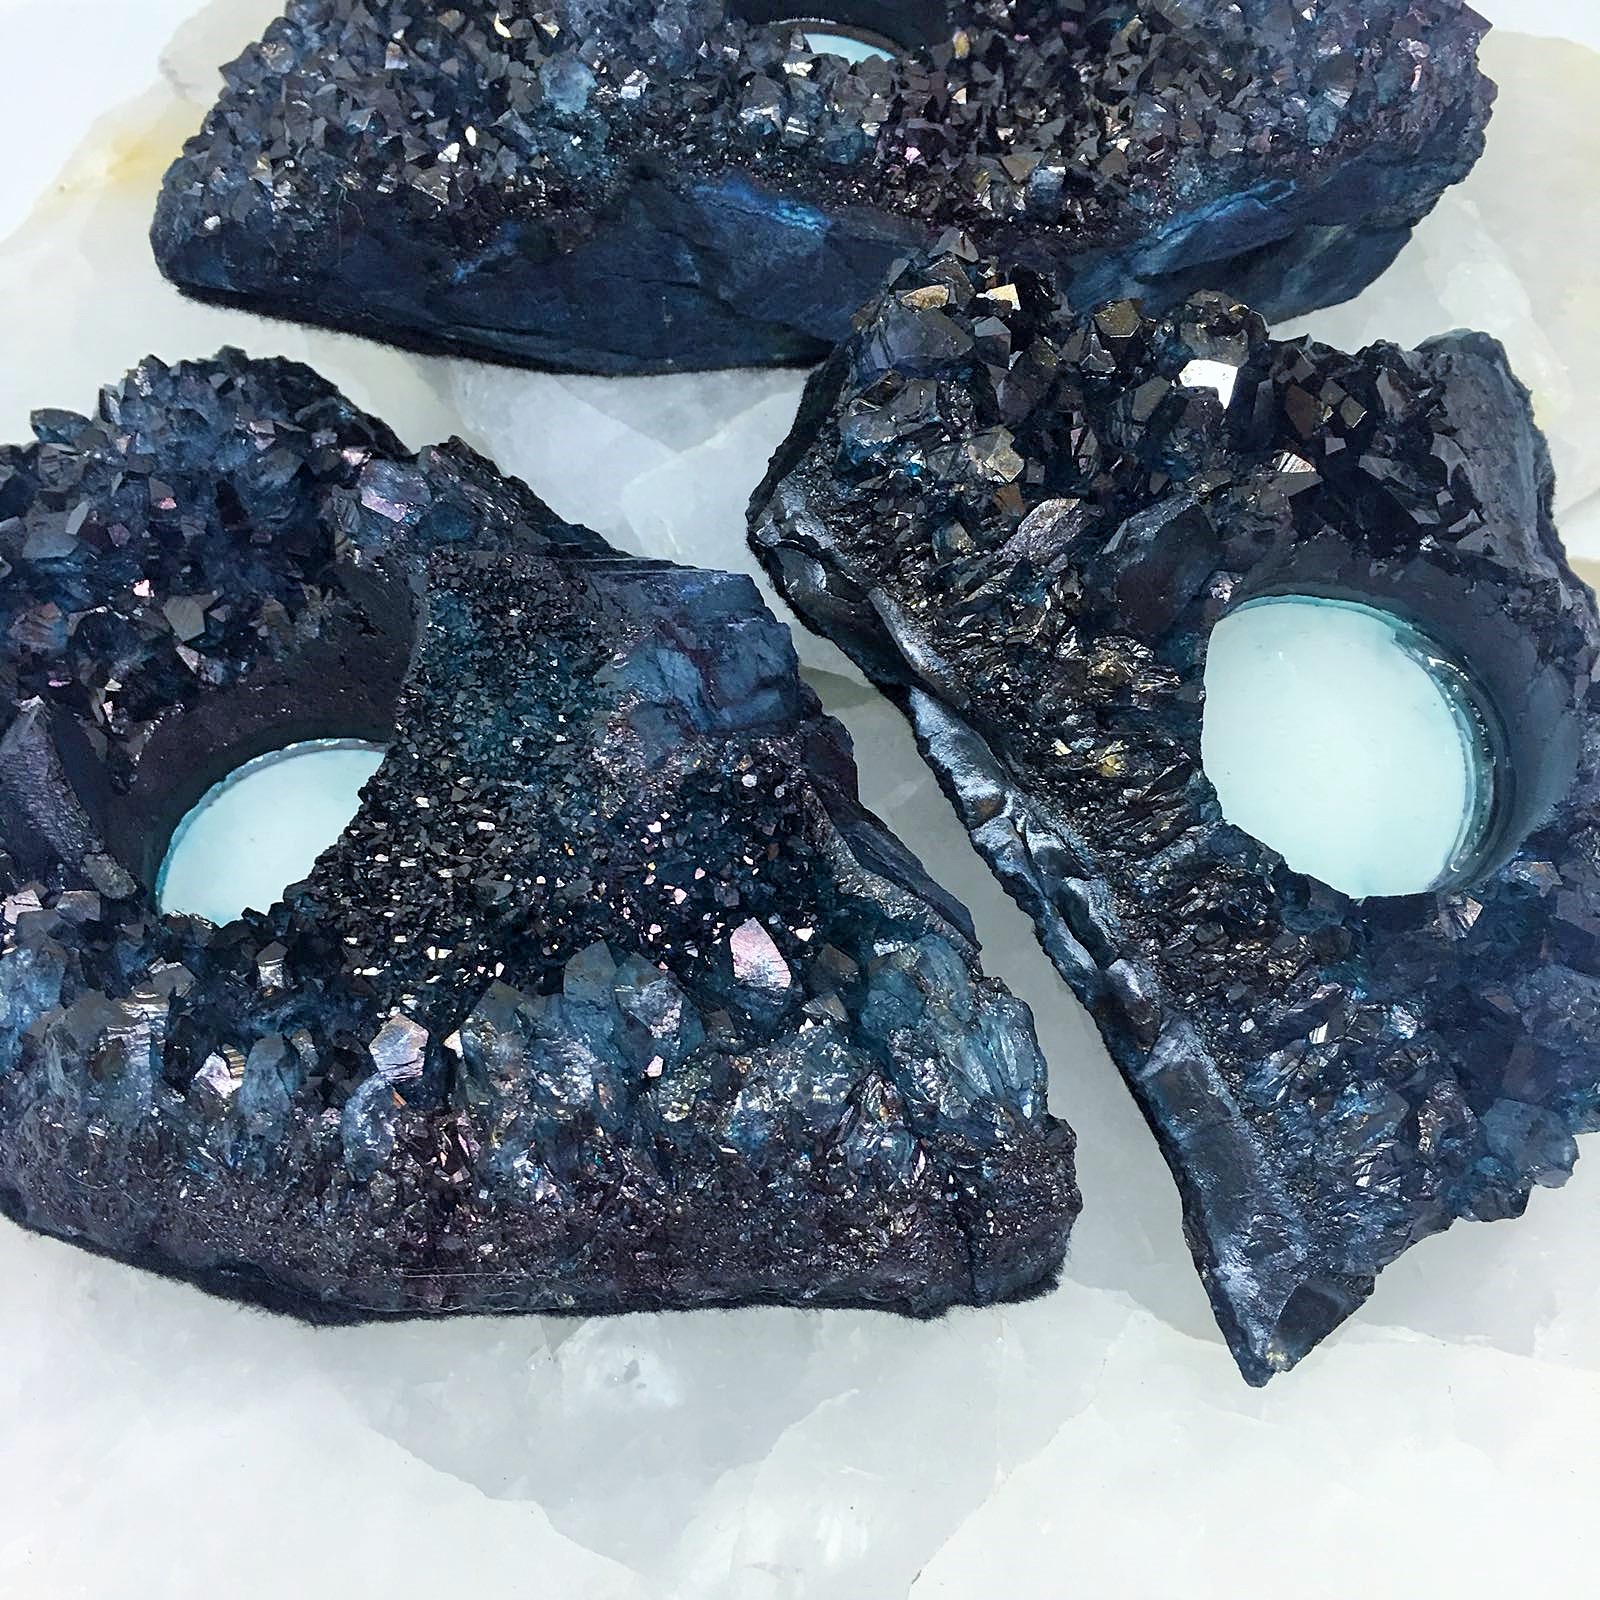 Stones from Uruguay - Teal Dyed Amethyst Cluster Candle Holder, Amethyst Cluster Candle Holder, Teal Dyed Amethyst Druzy Decor Candle Holder, Metaphysical Candle Holder,  Chakra Crystals Amethyst Candle Holder